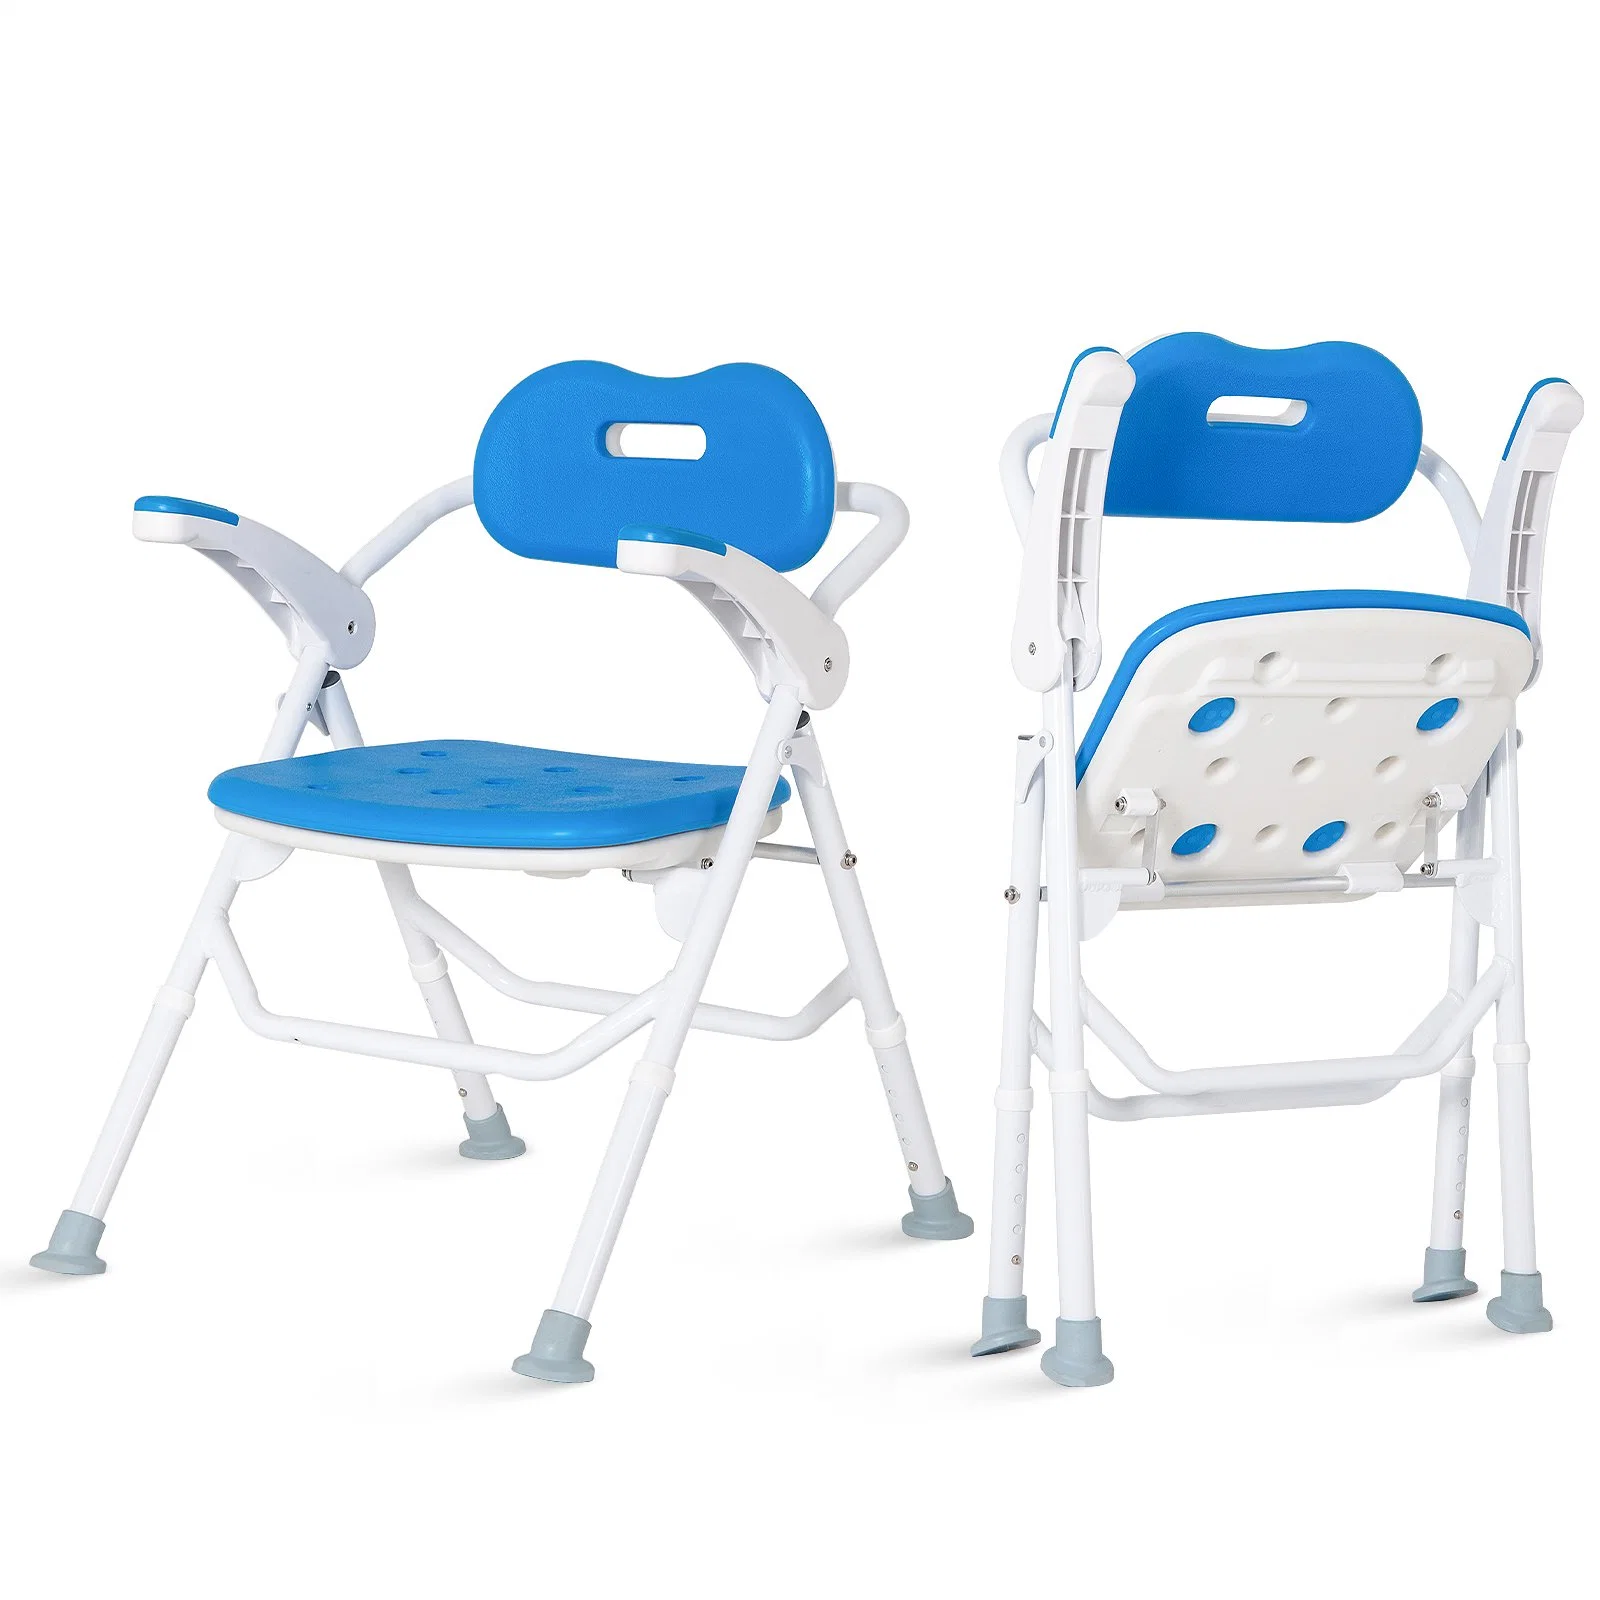 Heinsy Foldable Shower Bath Seat Chair with Heavy Duty Arms and Back for Senior Disabled Elderly.